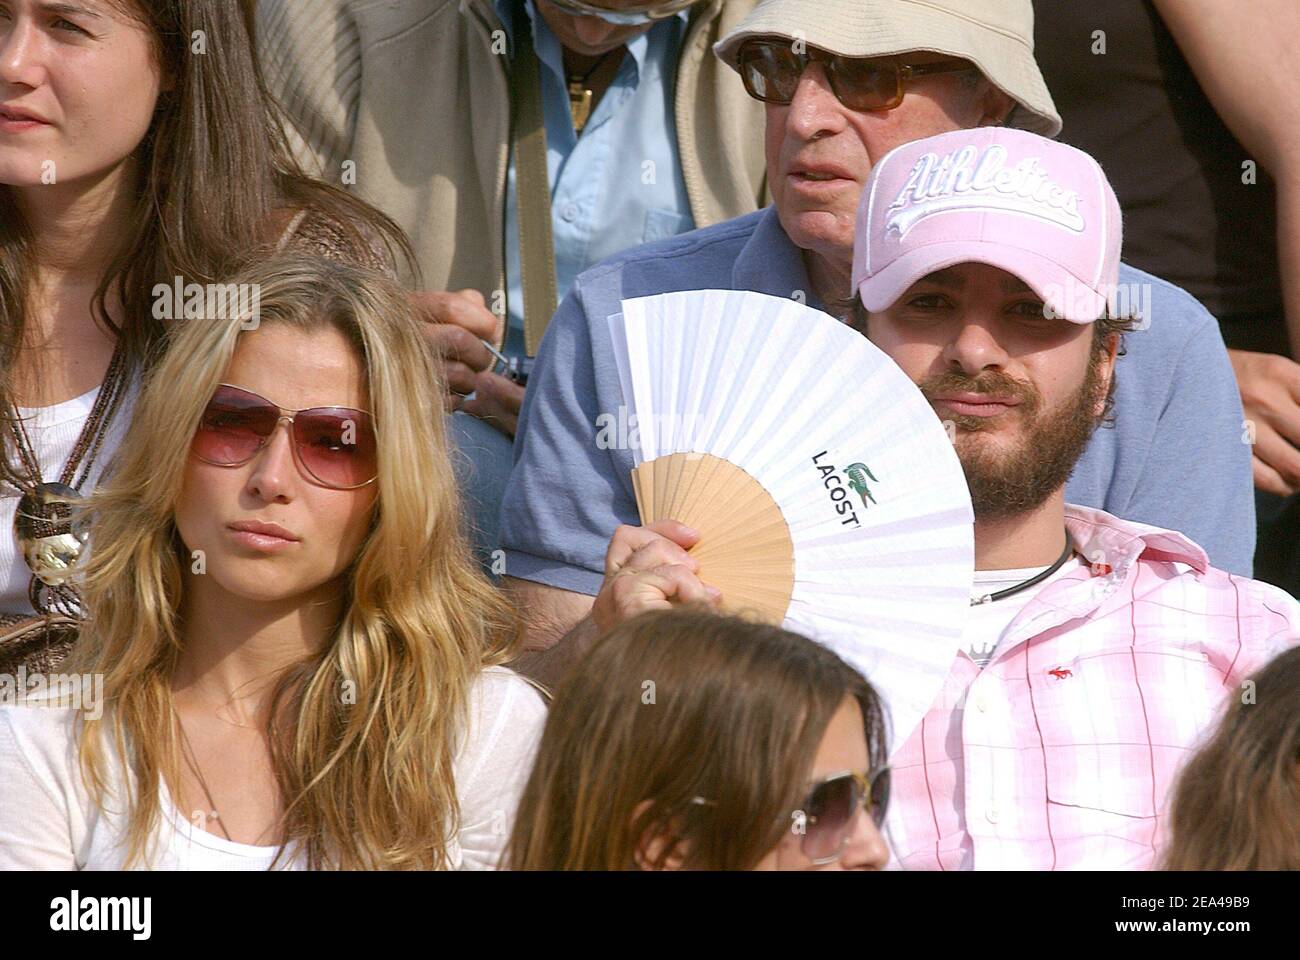 French actor Michael Youn and his girlfriend Spanish actress Elsa Pataky attend the match between Spain's Rafael Nadal and Swiss Roger Federer in the semi final of the French Open at the Roland Garros stadium in Paris, France on June 03, 2005. Michael Youn gains weight for his next movie. Photo by Gorassini-Zabulon/ABACA. Stock Photo